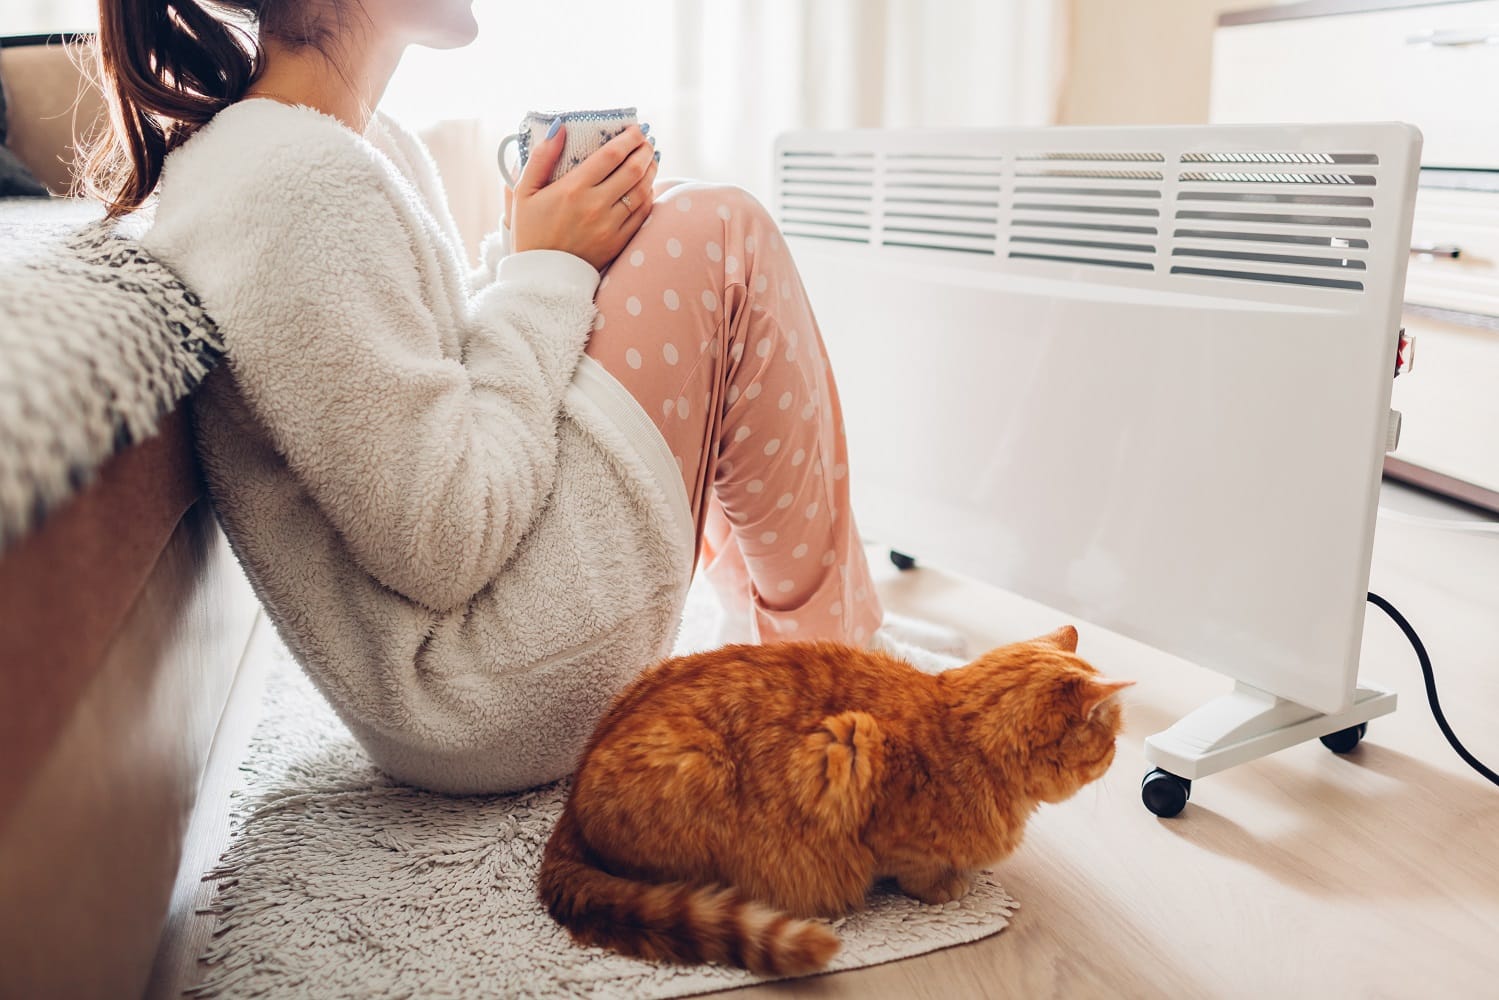 Using heater at home in winter. Woman warming and drinking tea with cat sitting by device and wearing warm clothes. Heating season.